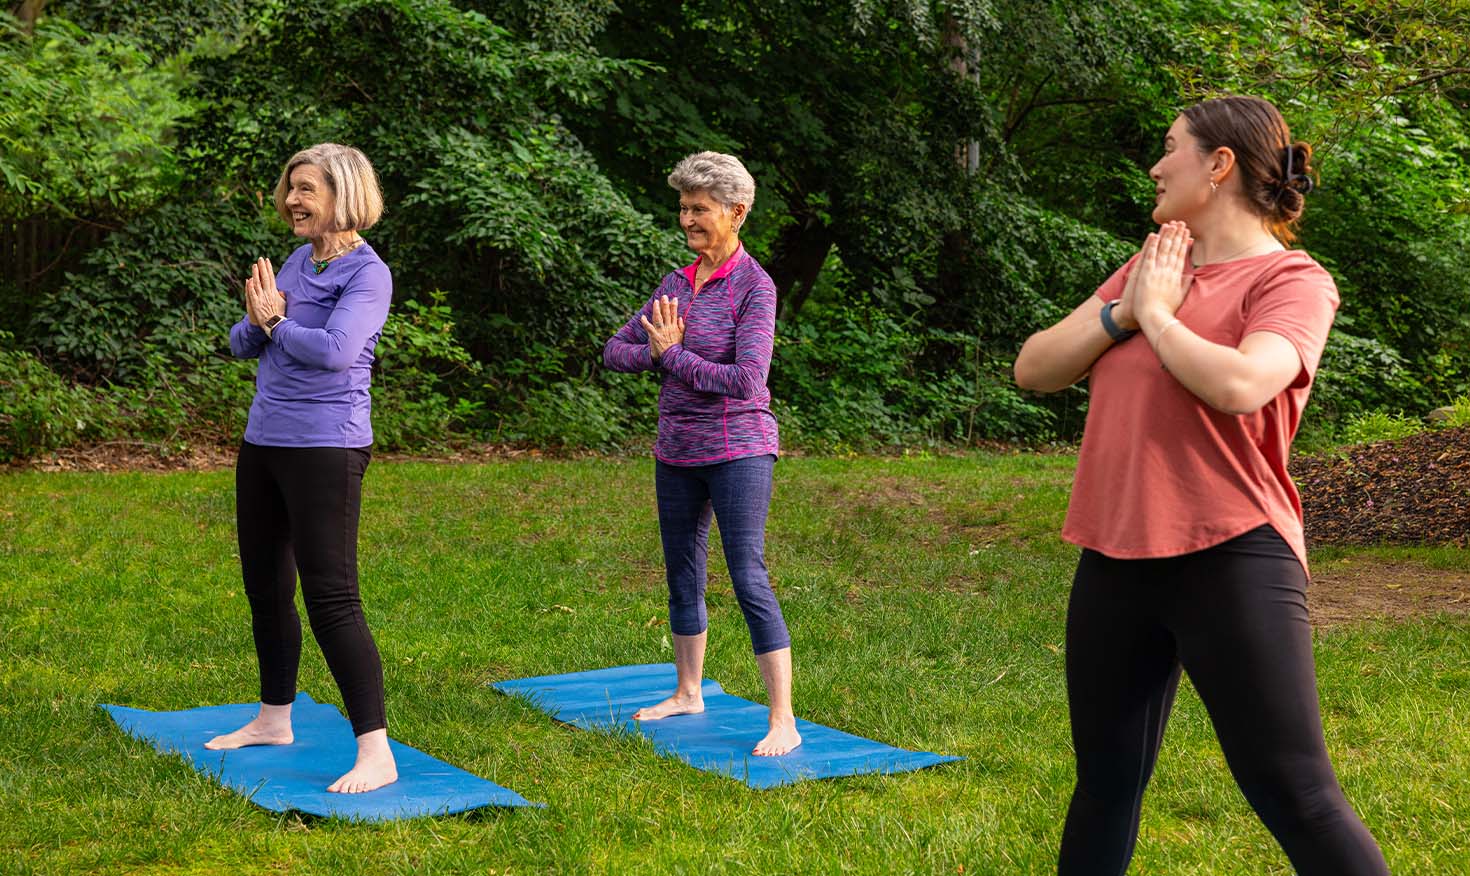 Two senior women at an outdoor yoga class with an instructor